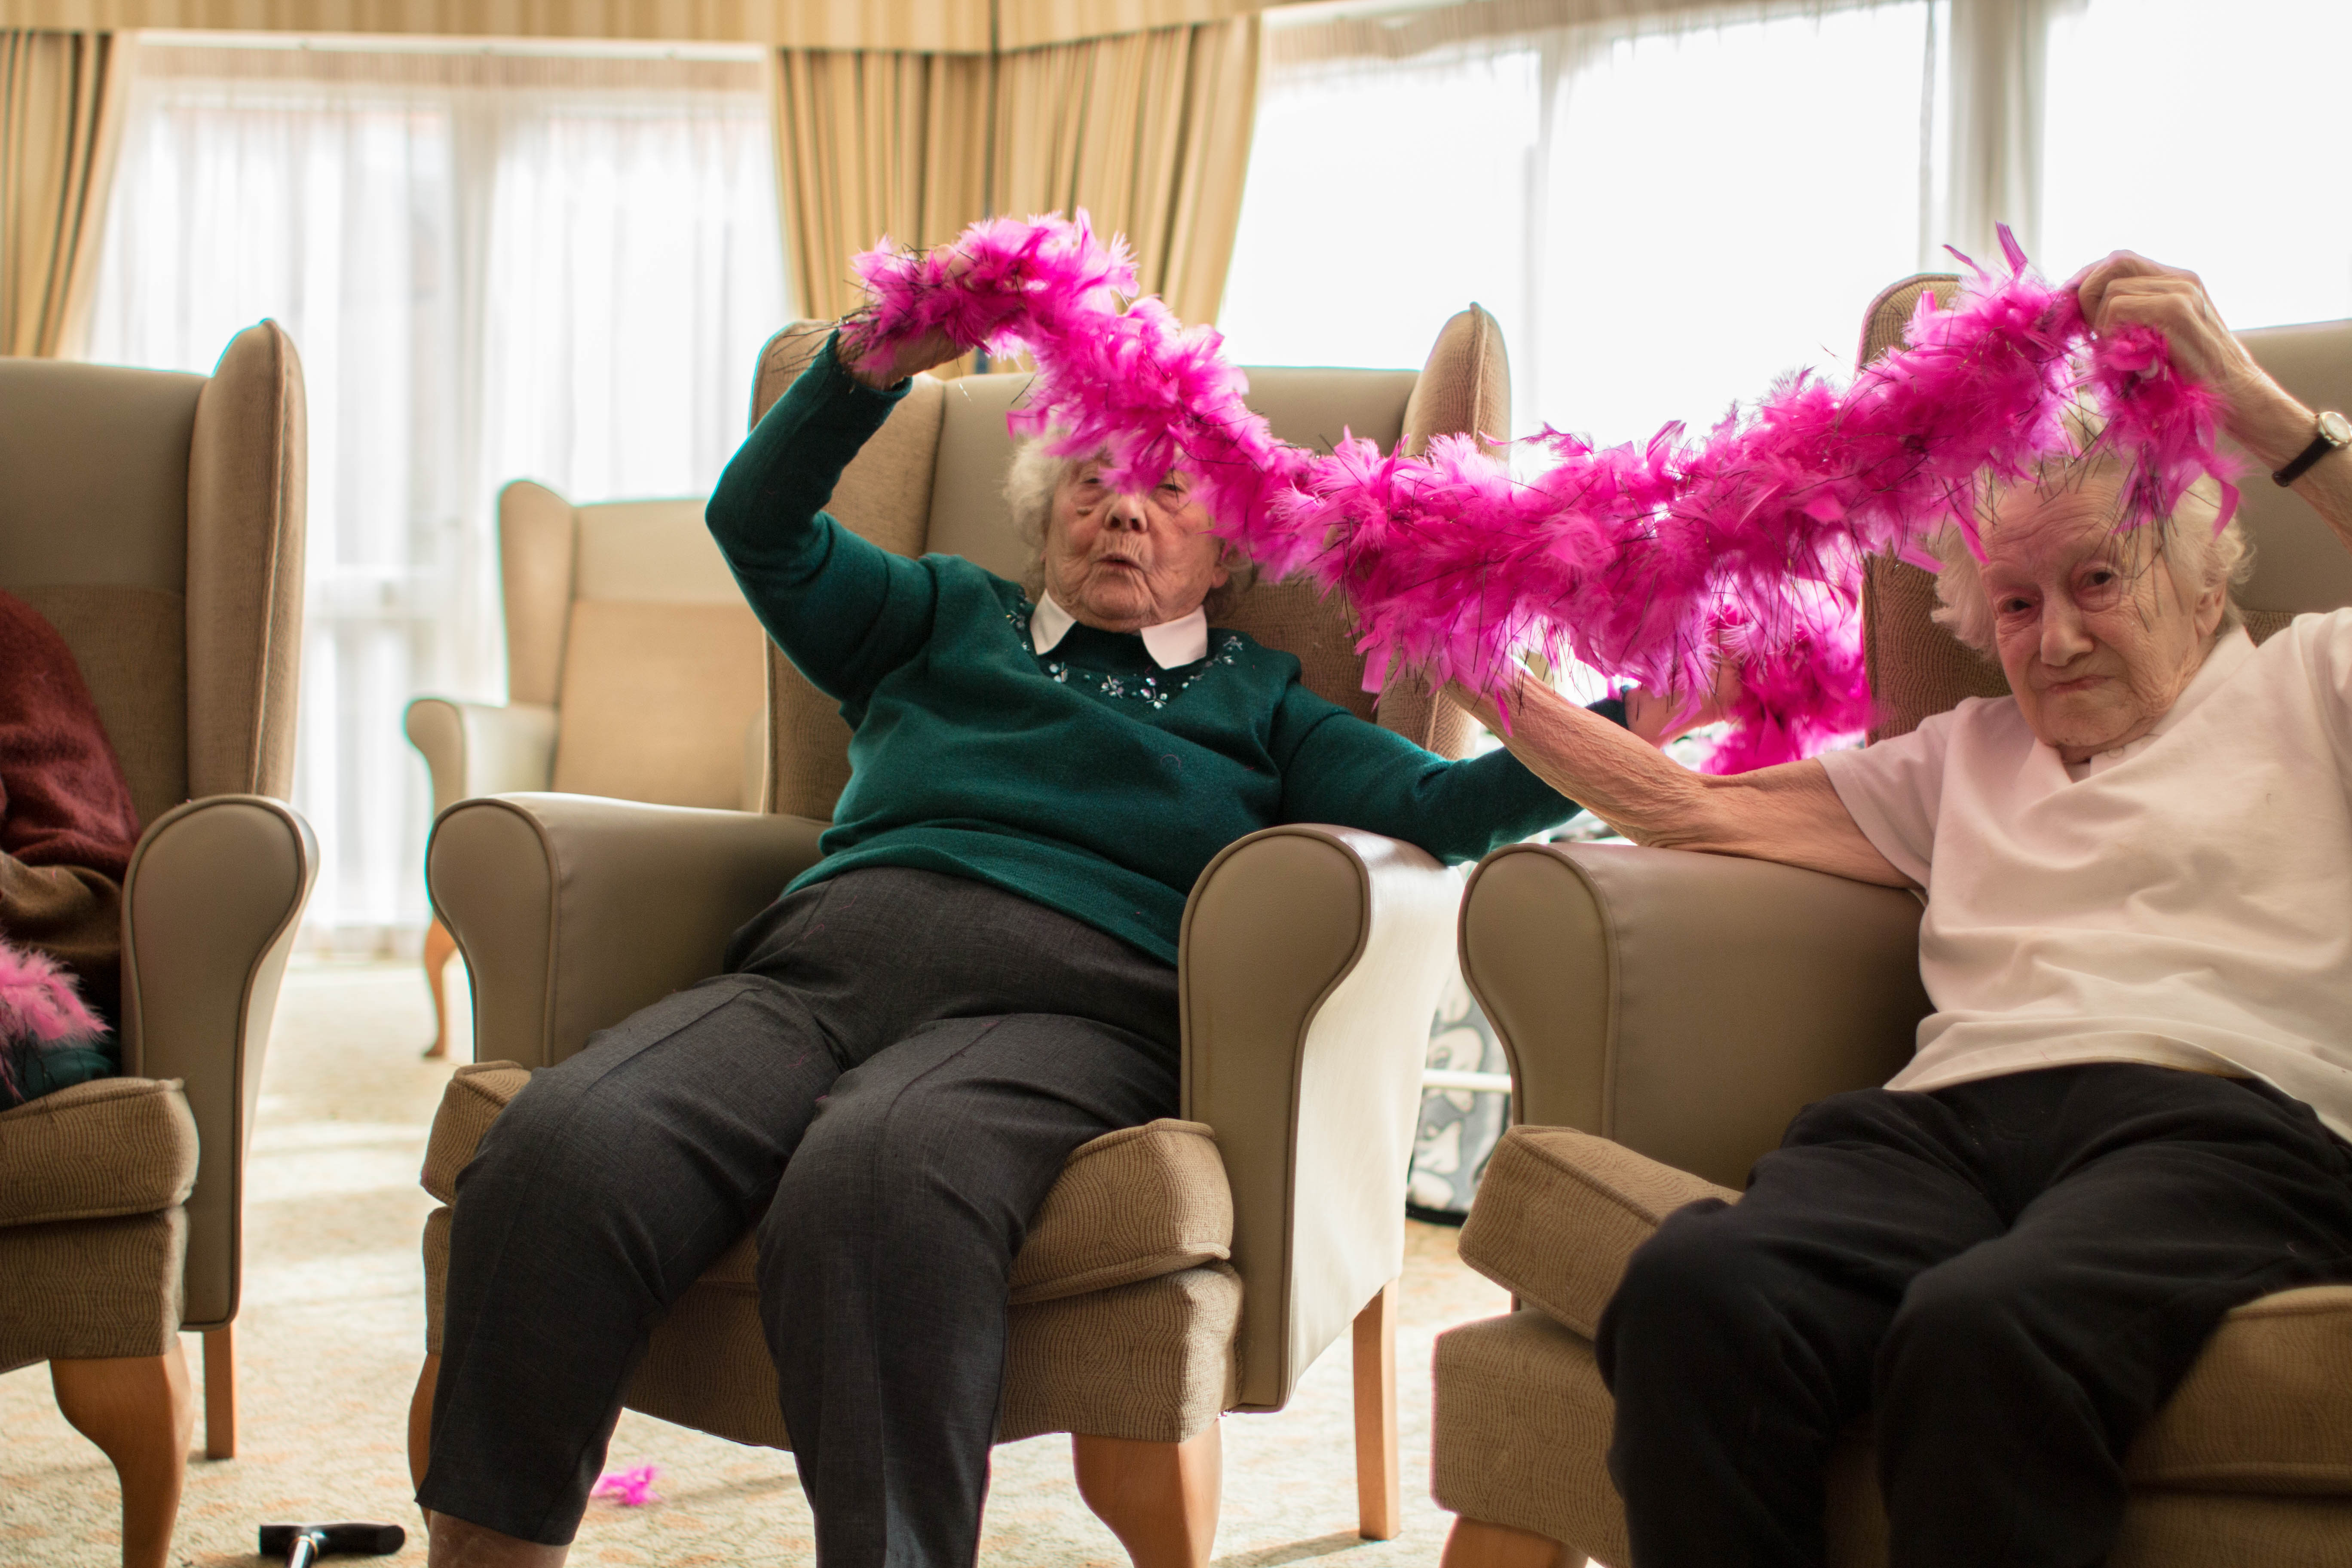 Craig Healthcare West Farm Care Home armchair aerobics ladies having fun with feathers